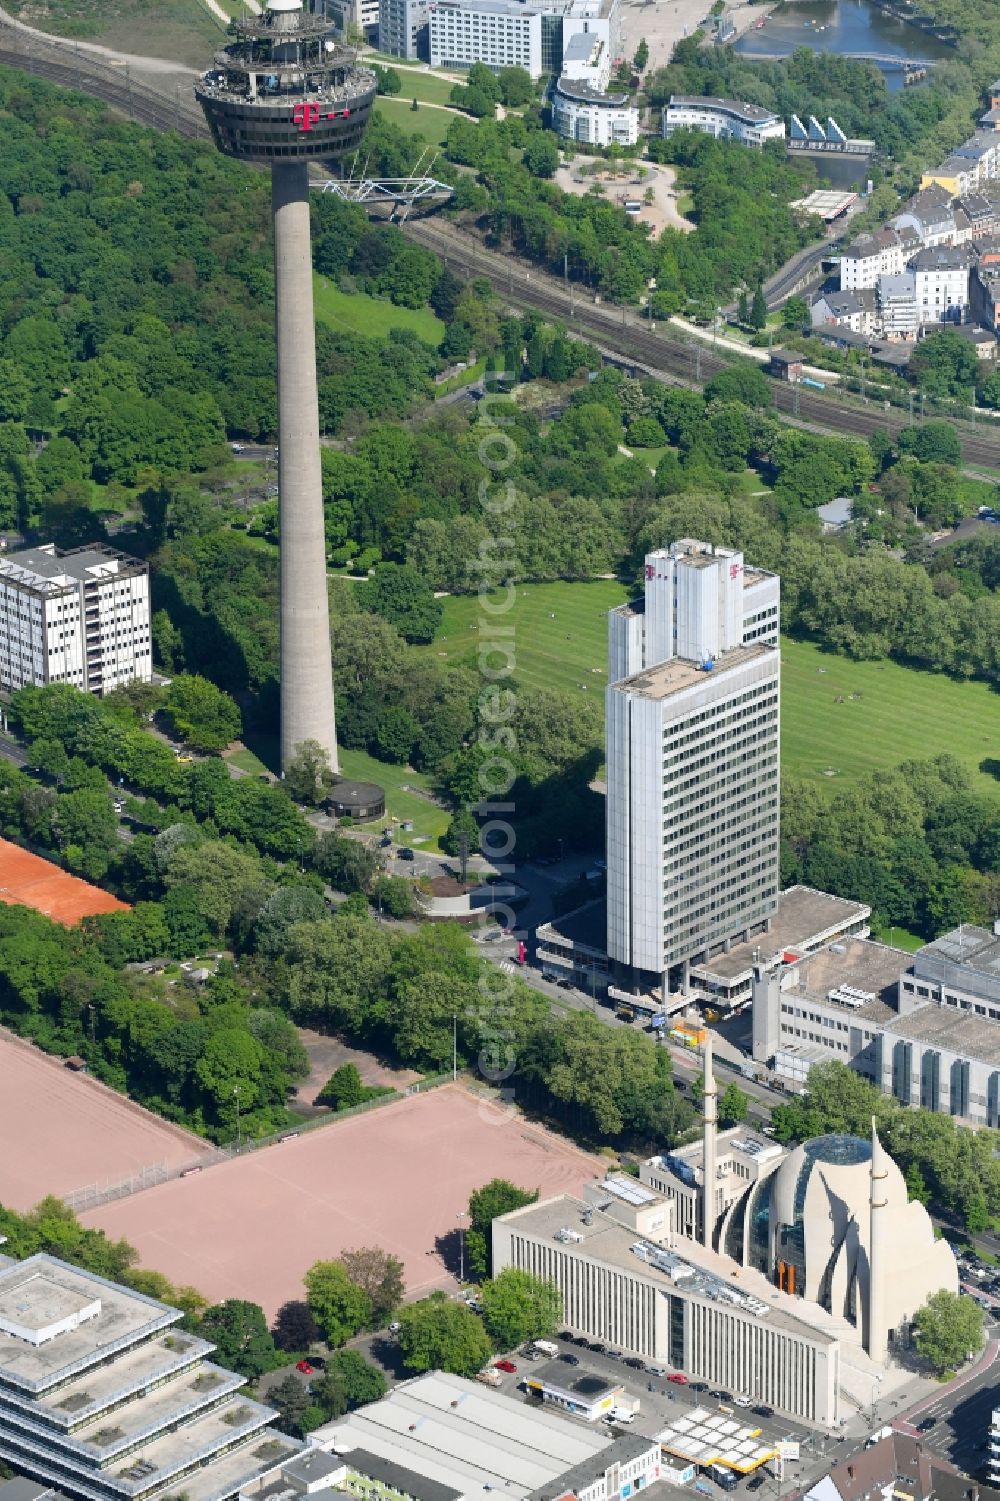 Aerial photograph Köln - Building the DITIB central mosque in Cologne, North Rhine-Westphalia